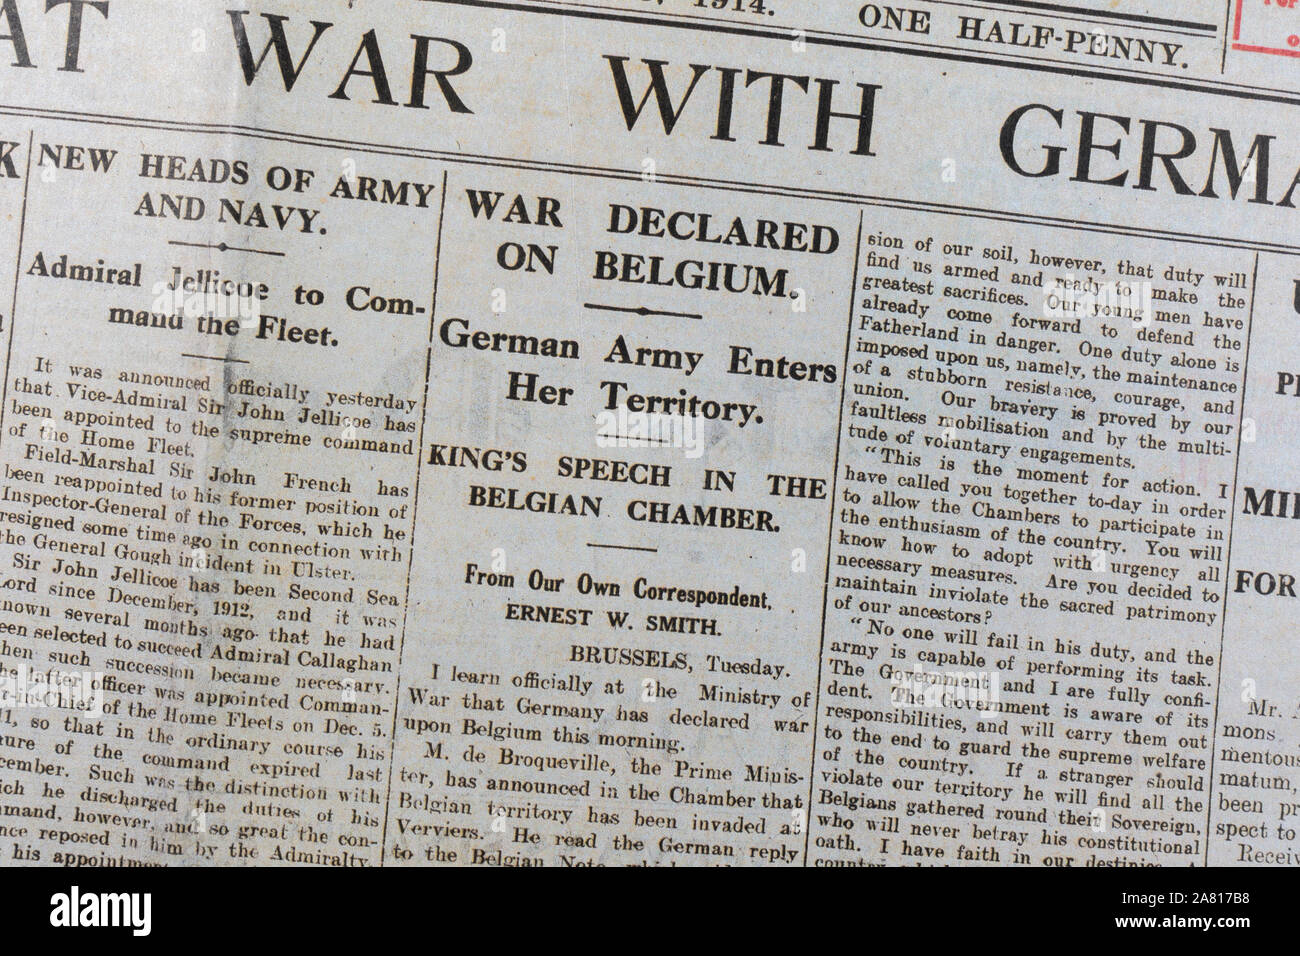 Replica newspaper at the start of World War One: The front page of the Daily News & Reader newspaper on 5th August 1914 announcing 'War At War'. Stock Photo